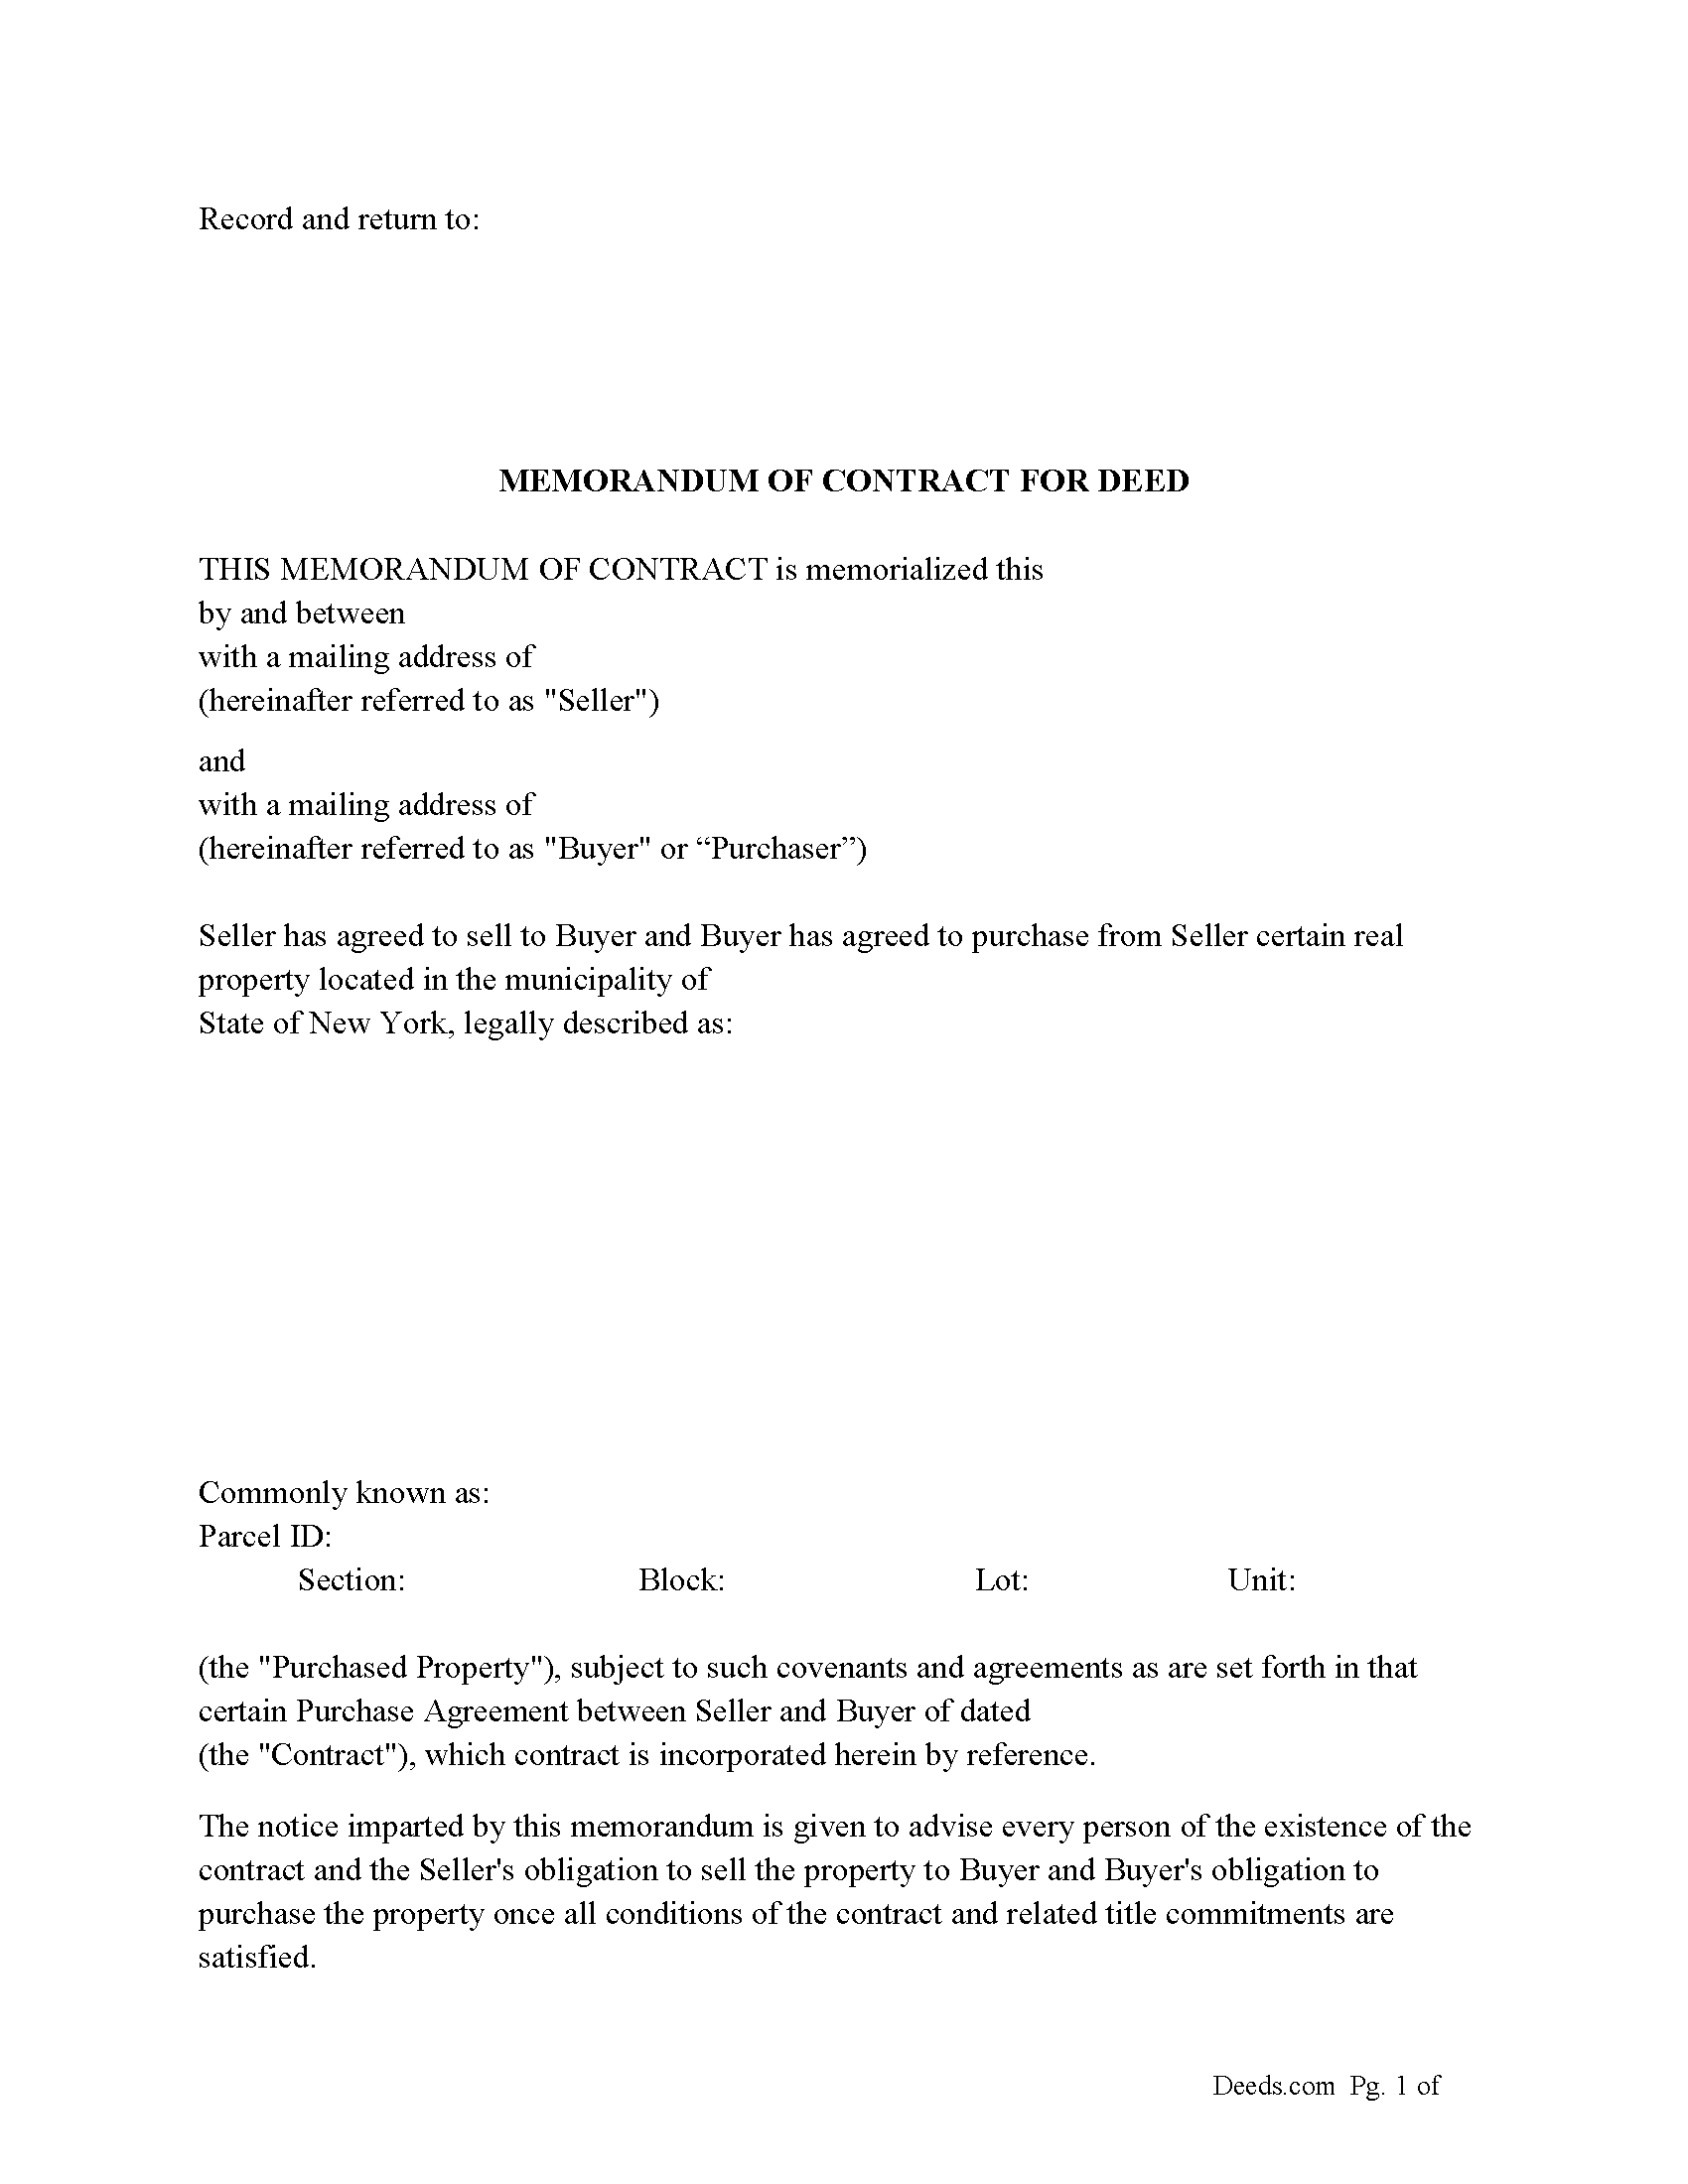 Cayuga County Memorandum of Contract for Deed Form